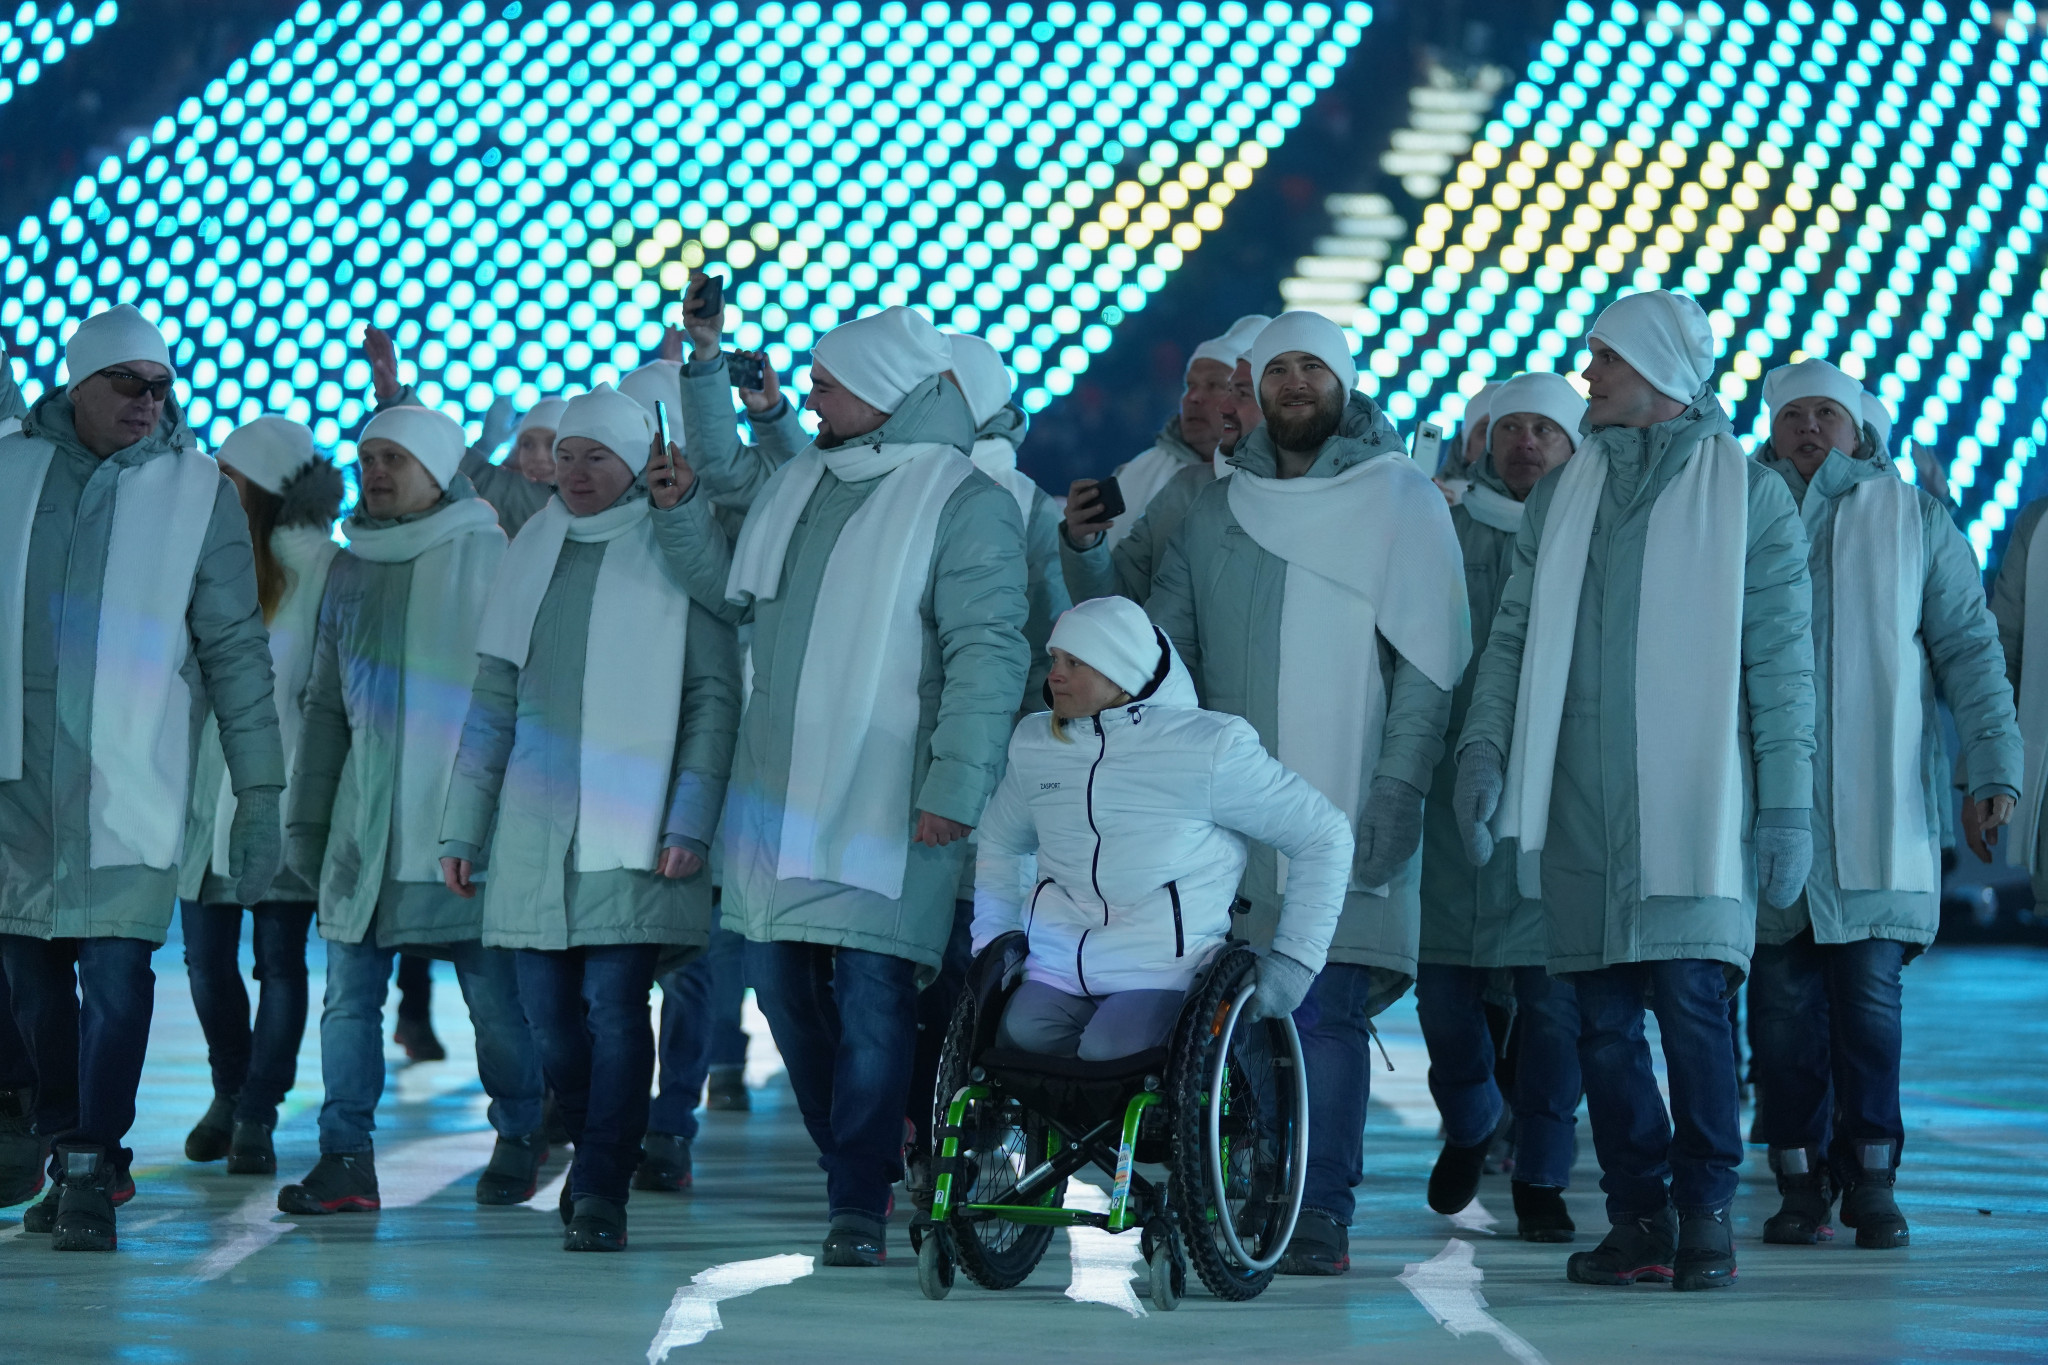 Russia are competing under the banner of Neutral Paralympic Athletes at Pyeongchang 2018 ©Getty Images